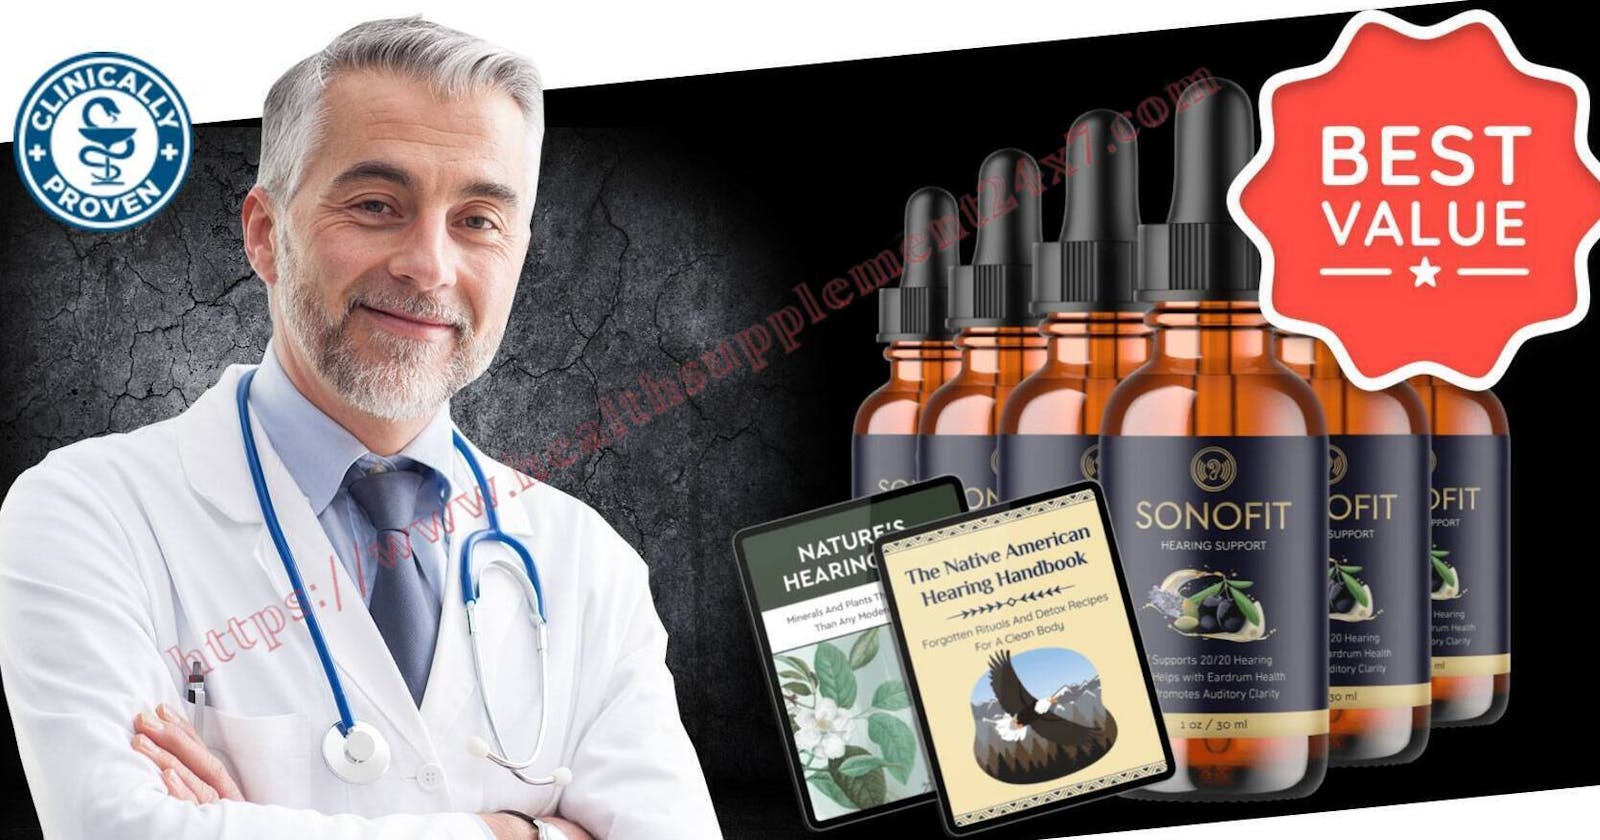 SonoFit {Ear Health Supplement} Protect From Hearing Loss, Tinnitus and Other Hearing Impairments(Work Or Hoax)